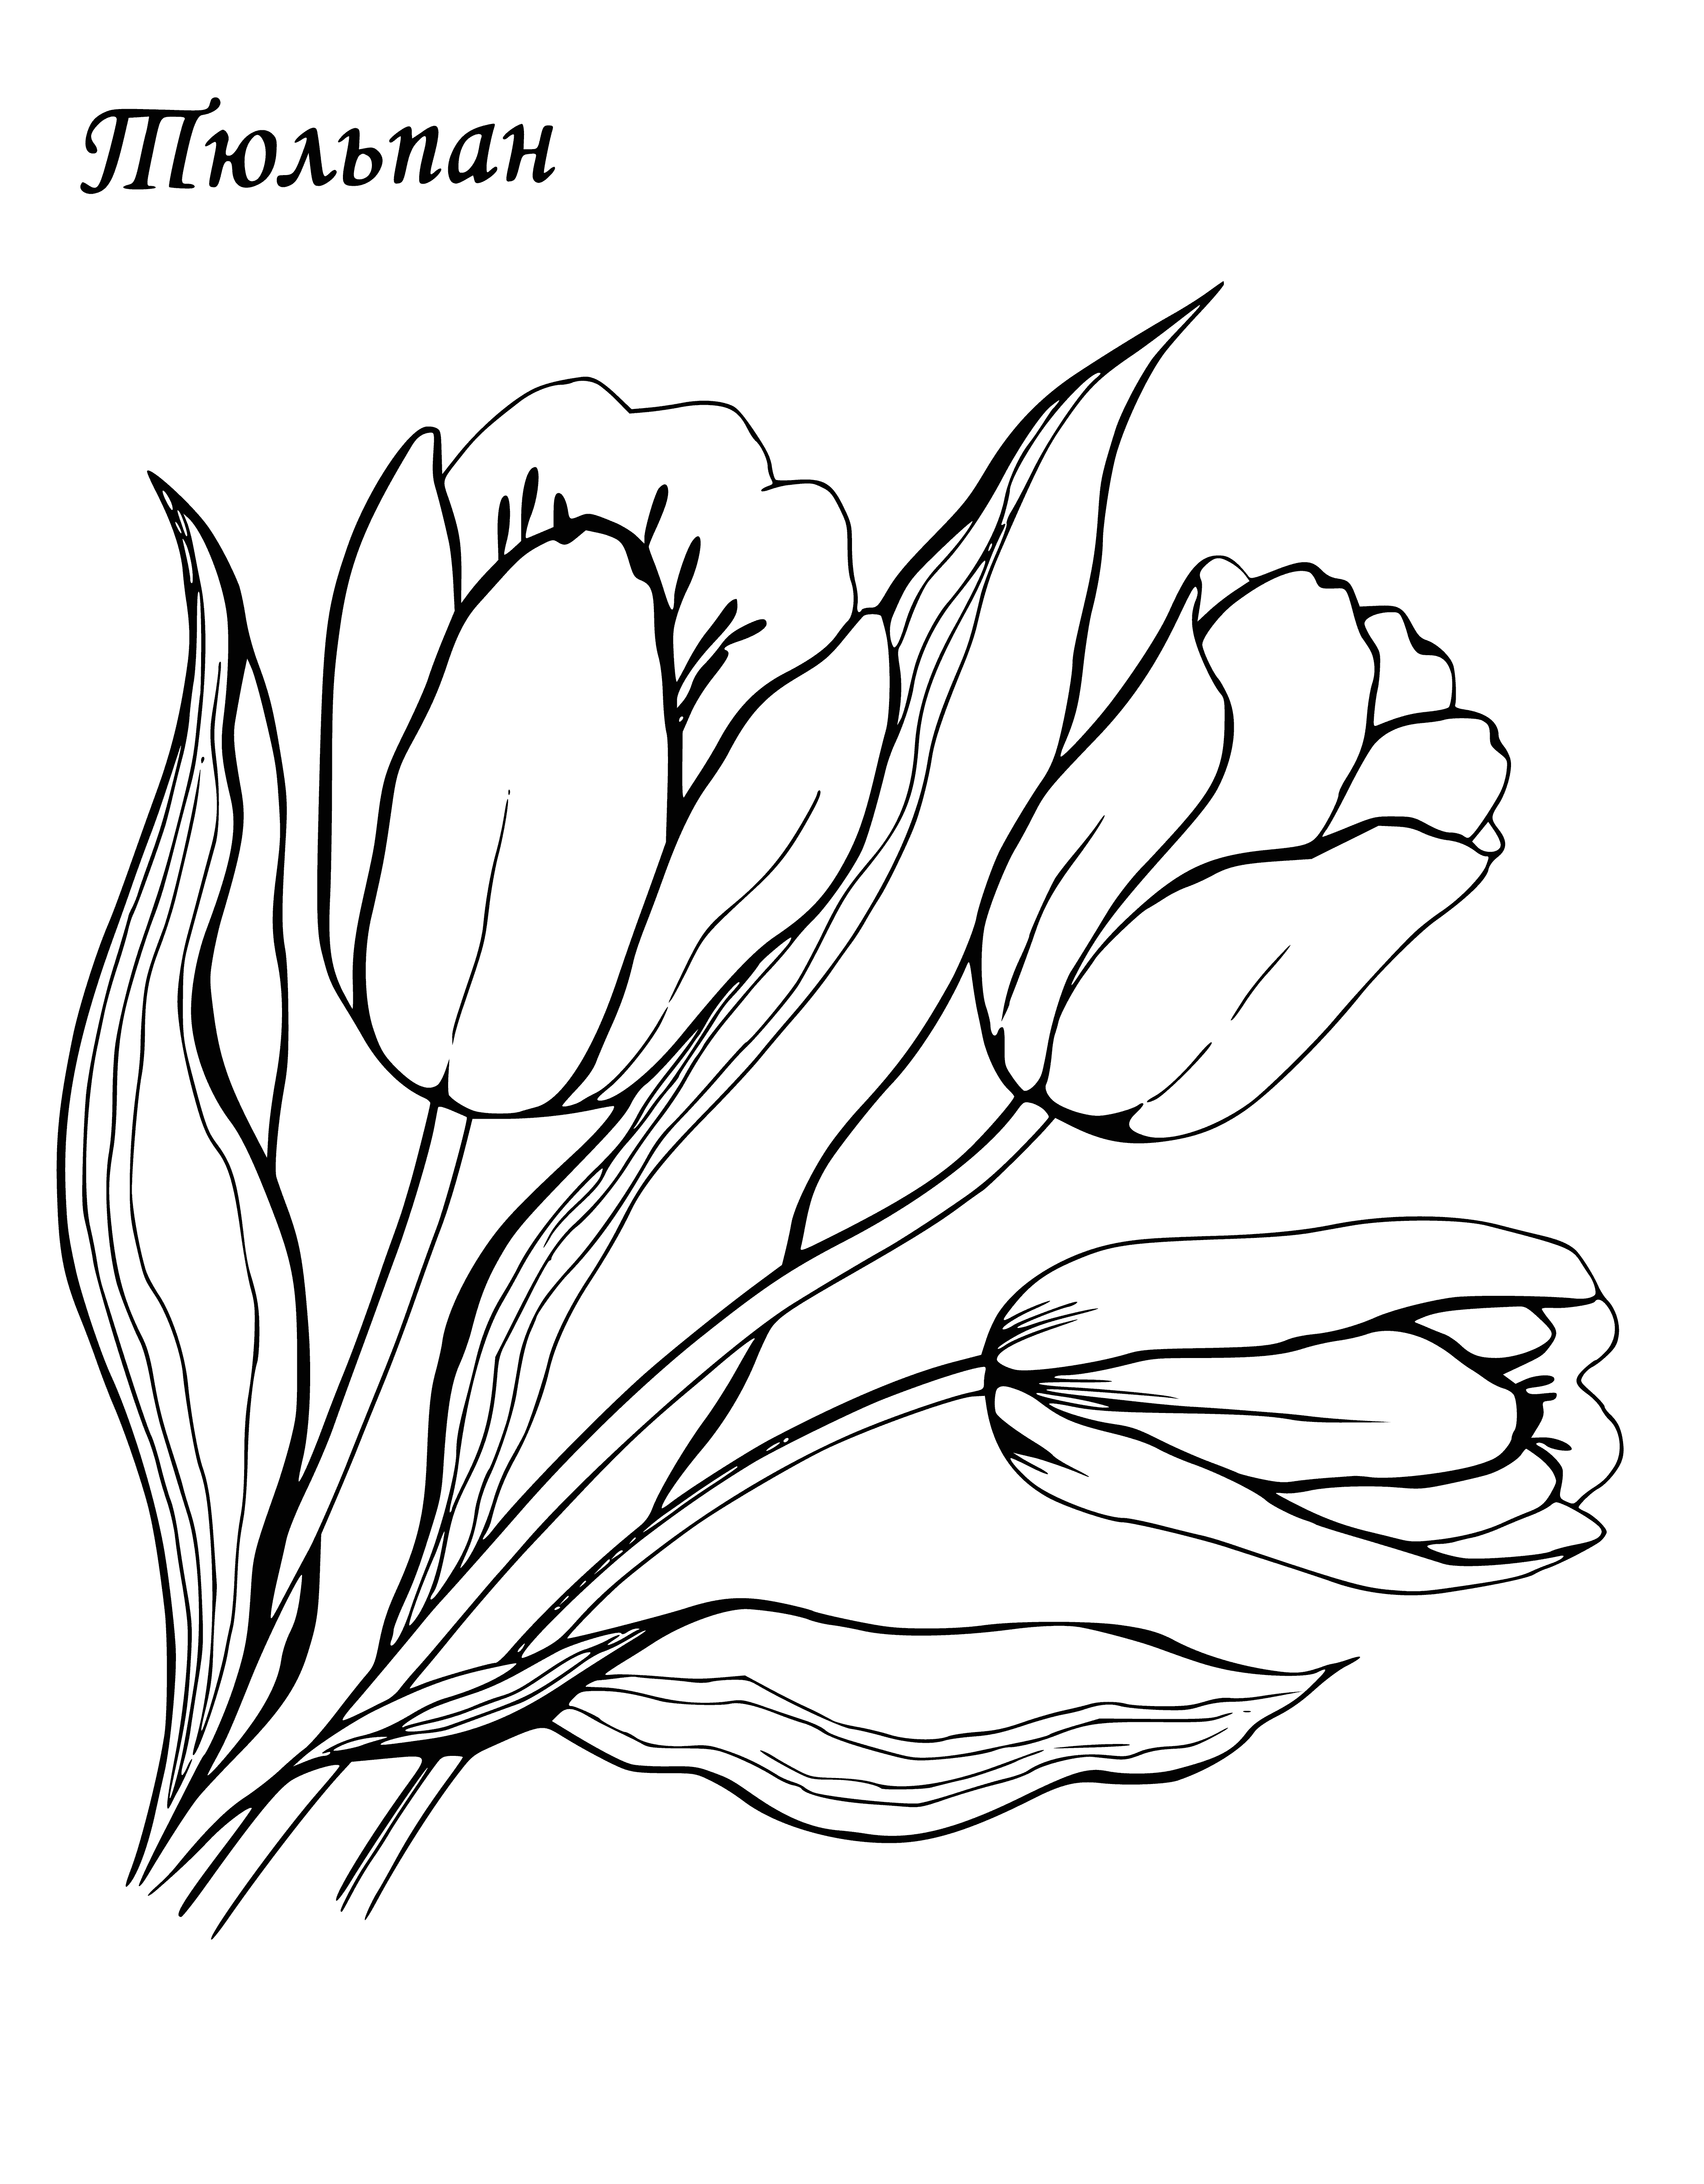 coloring page: A close-up shot of a tulip w/ yellow & red streaked petals, water droplets on the leaves & hairs on petals seen. Background is blurry.